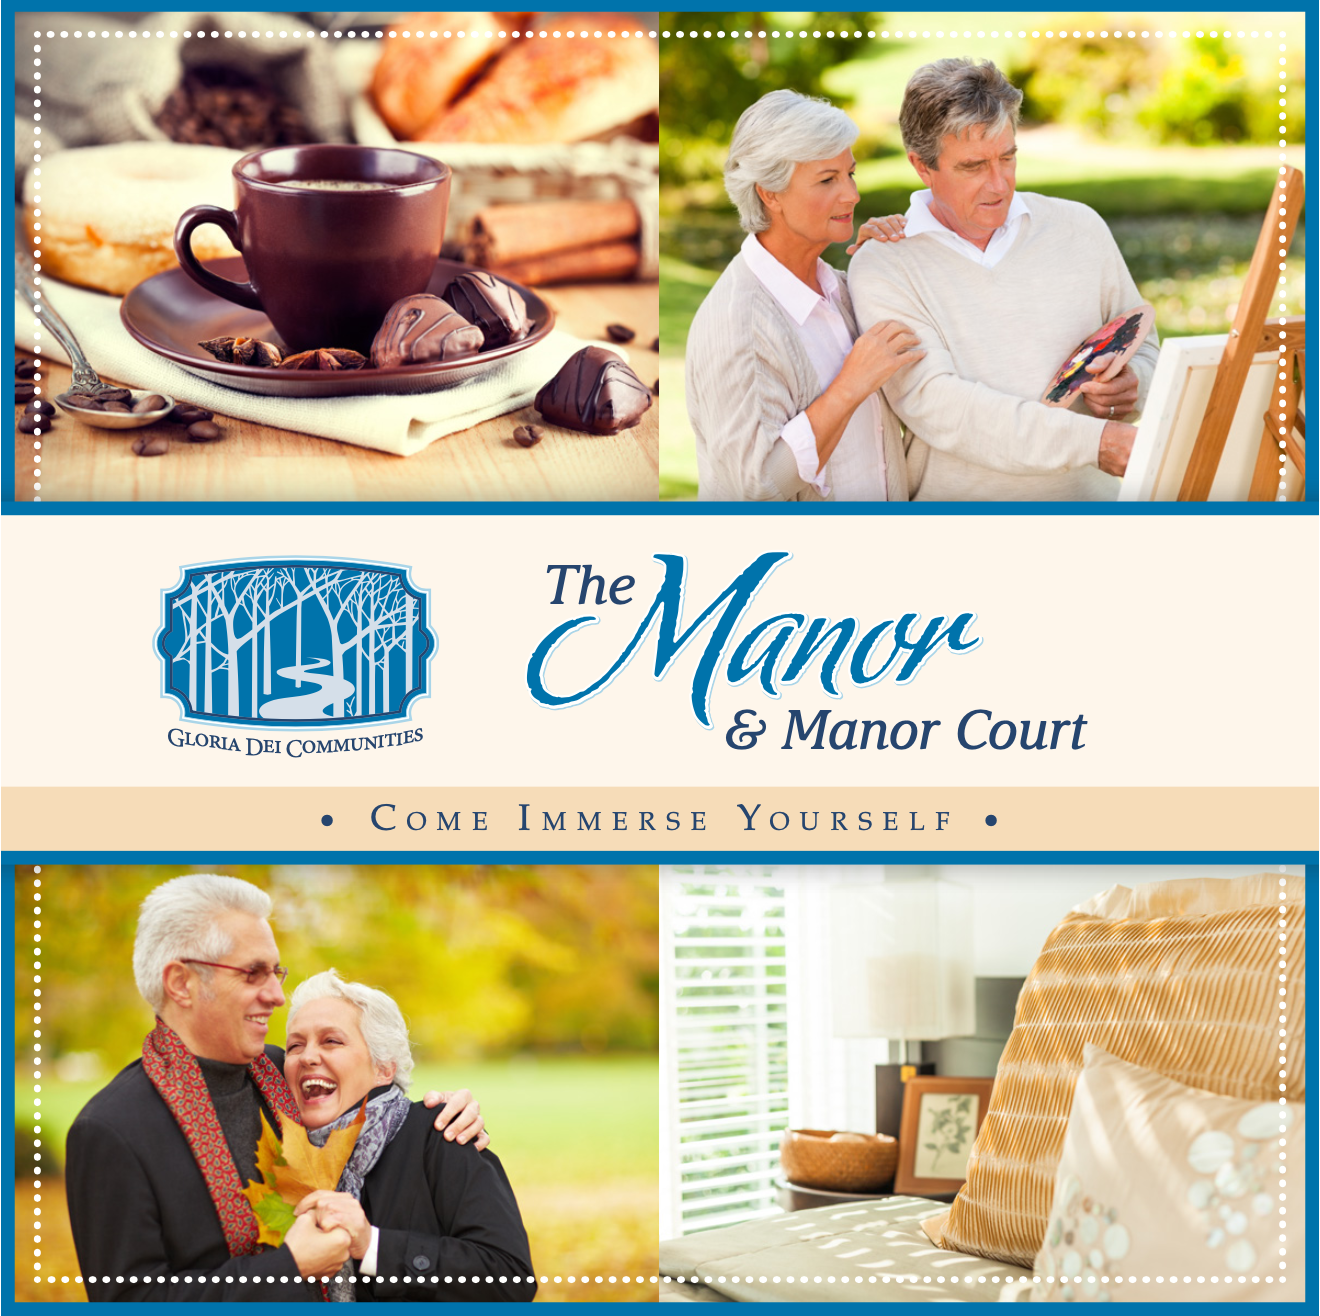 If you'd like to learn more about the Manor and Manor Court, please click this link to get a PDF version of its brochure.